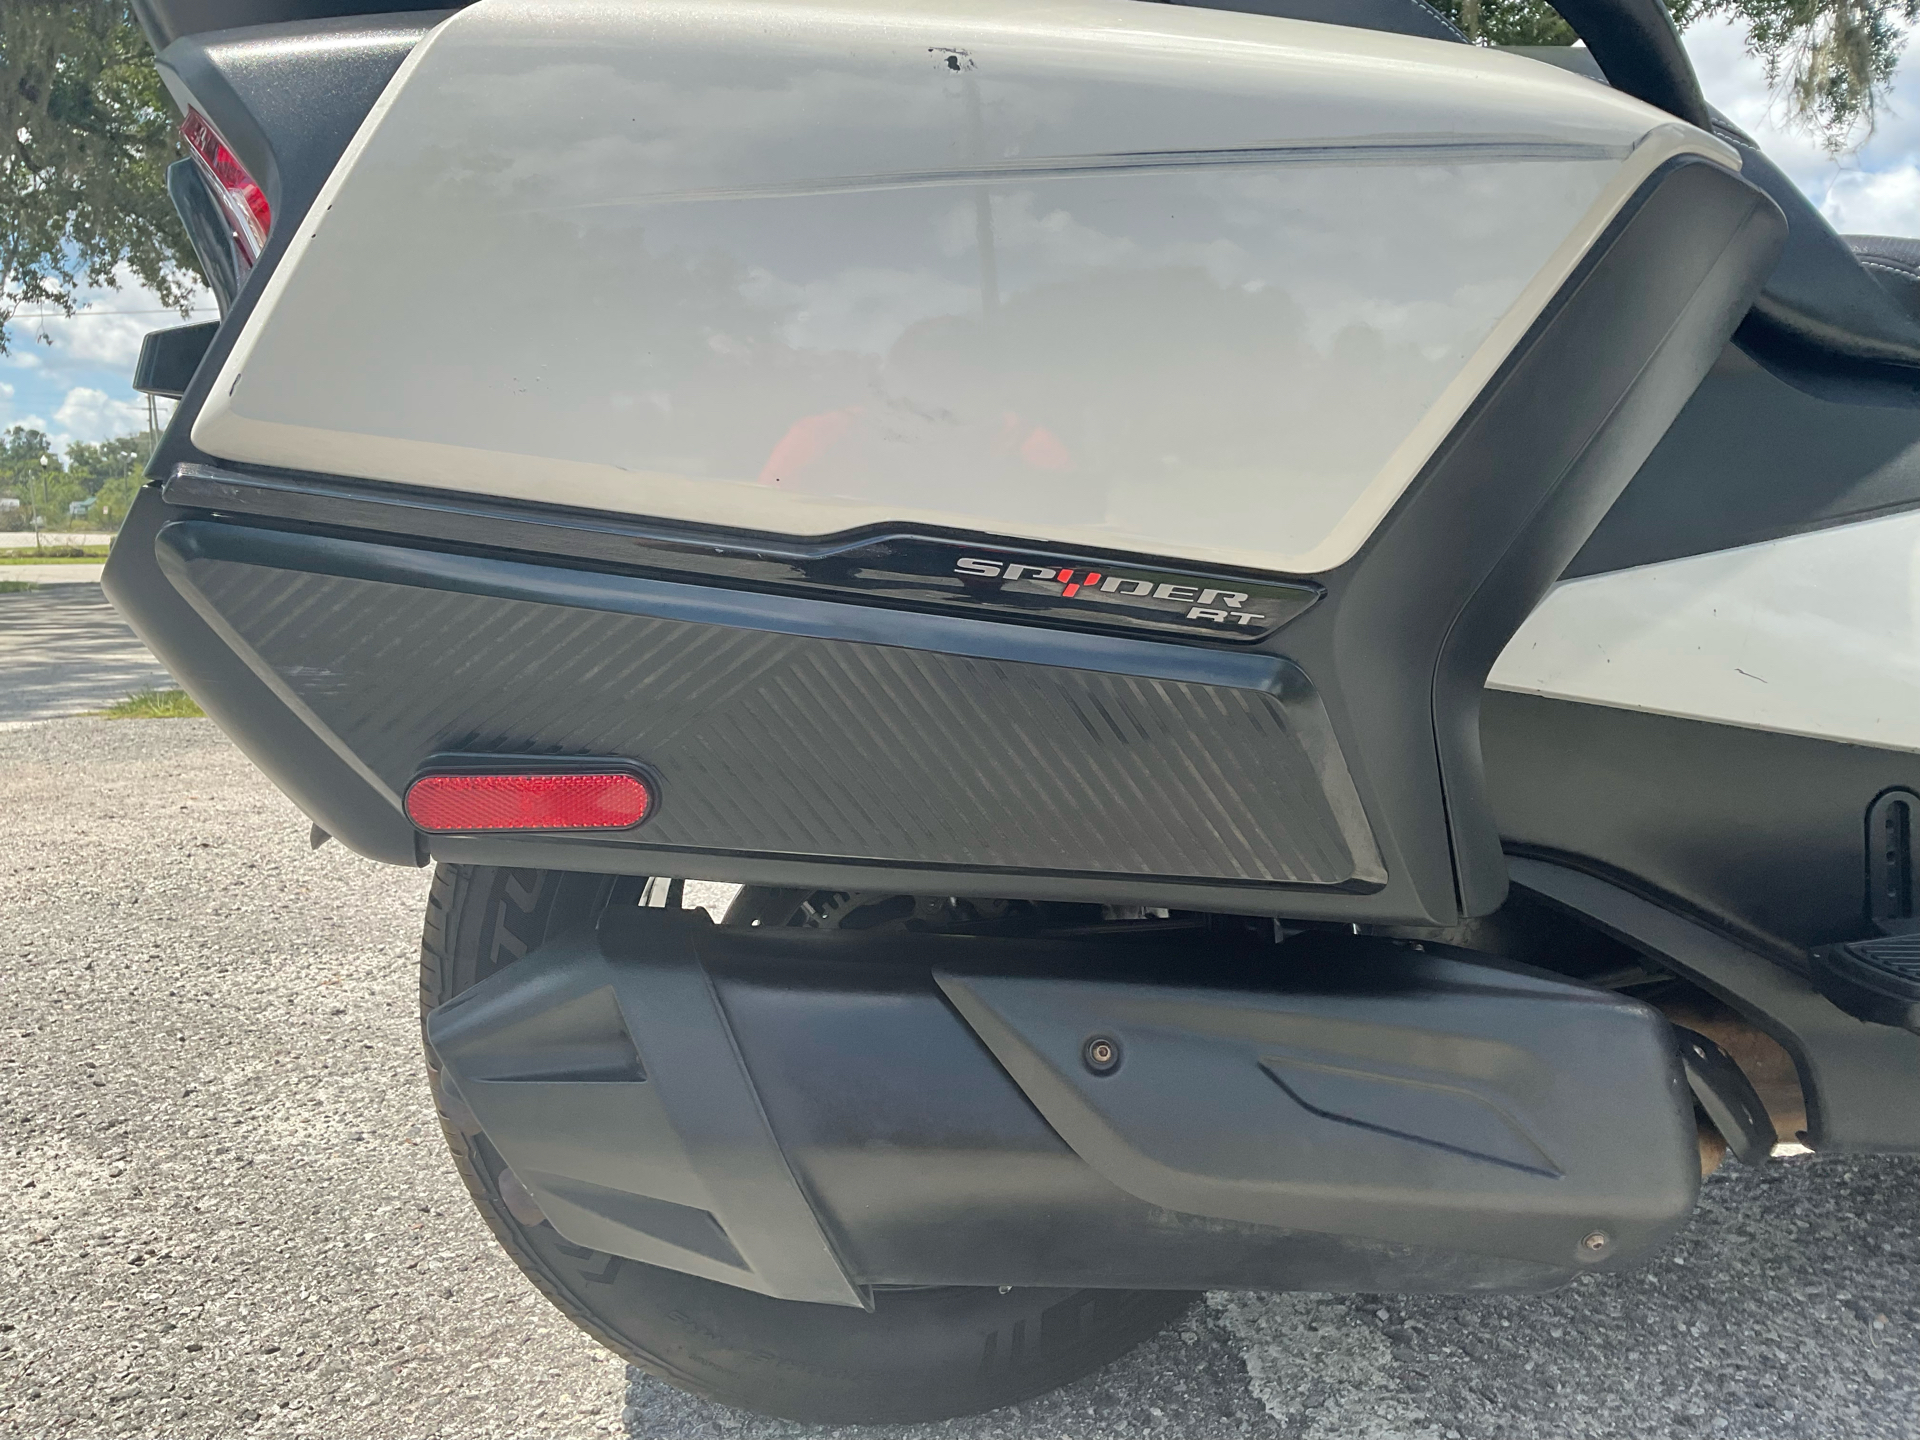 2020 Can-Am Spyder RT Limited in Sanford, Florida - Photo 11